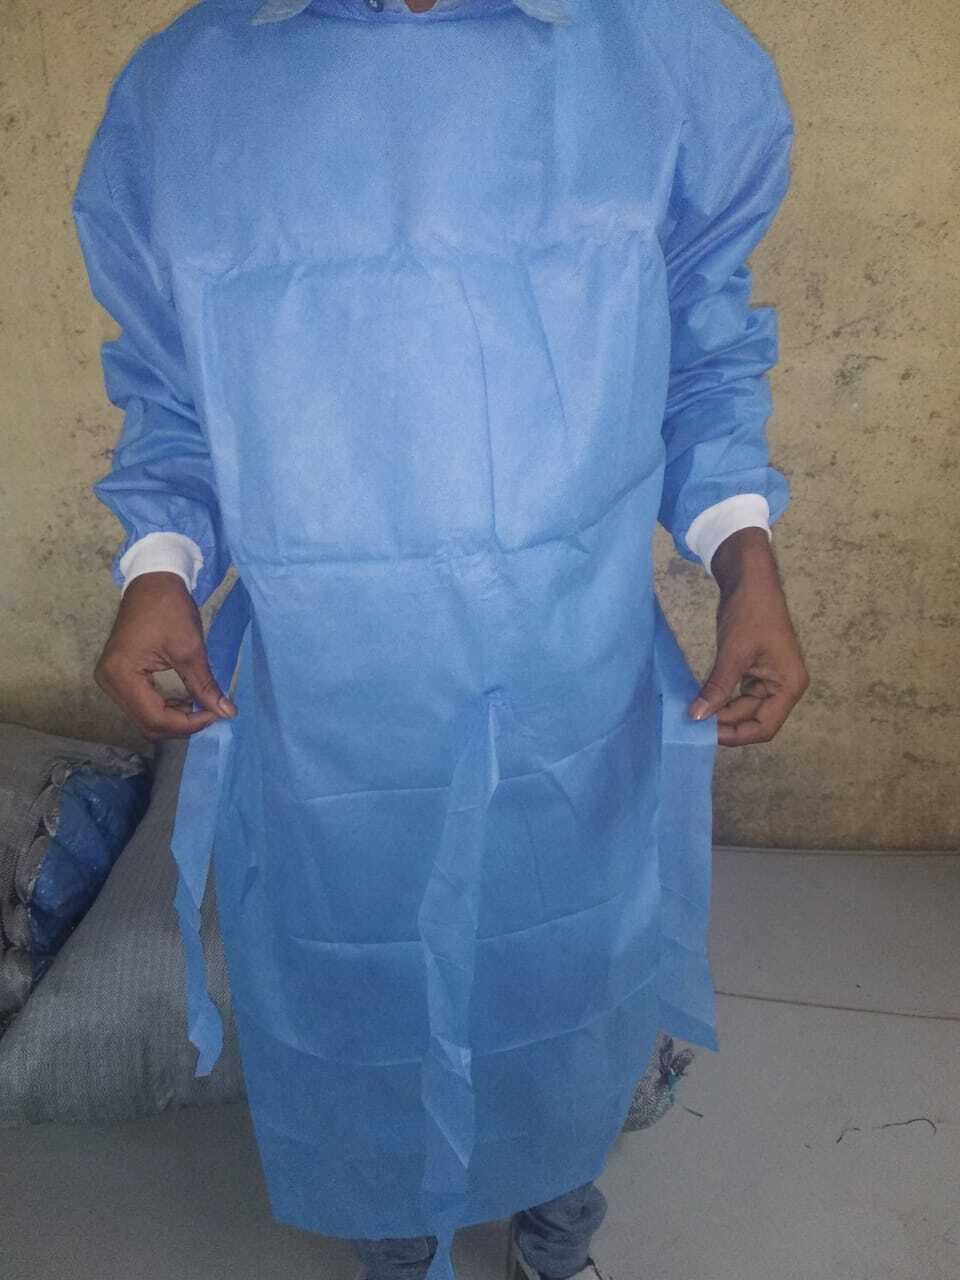 Sterile Gown